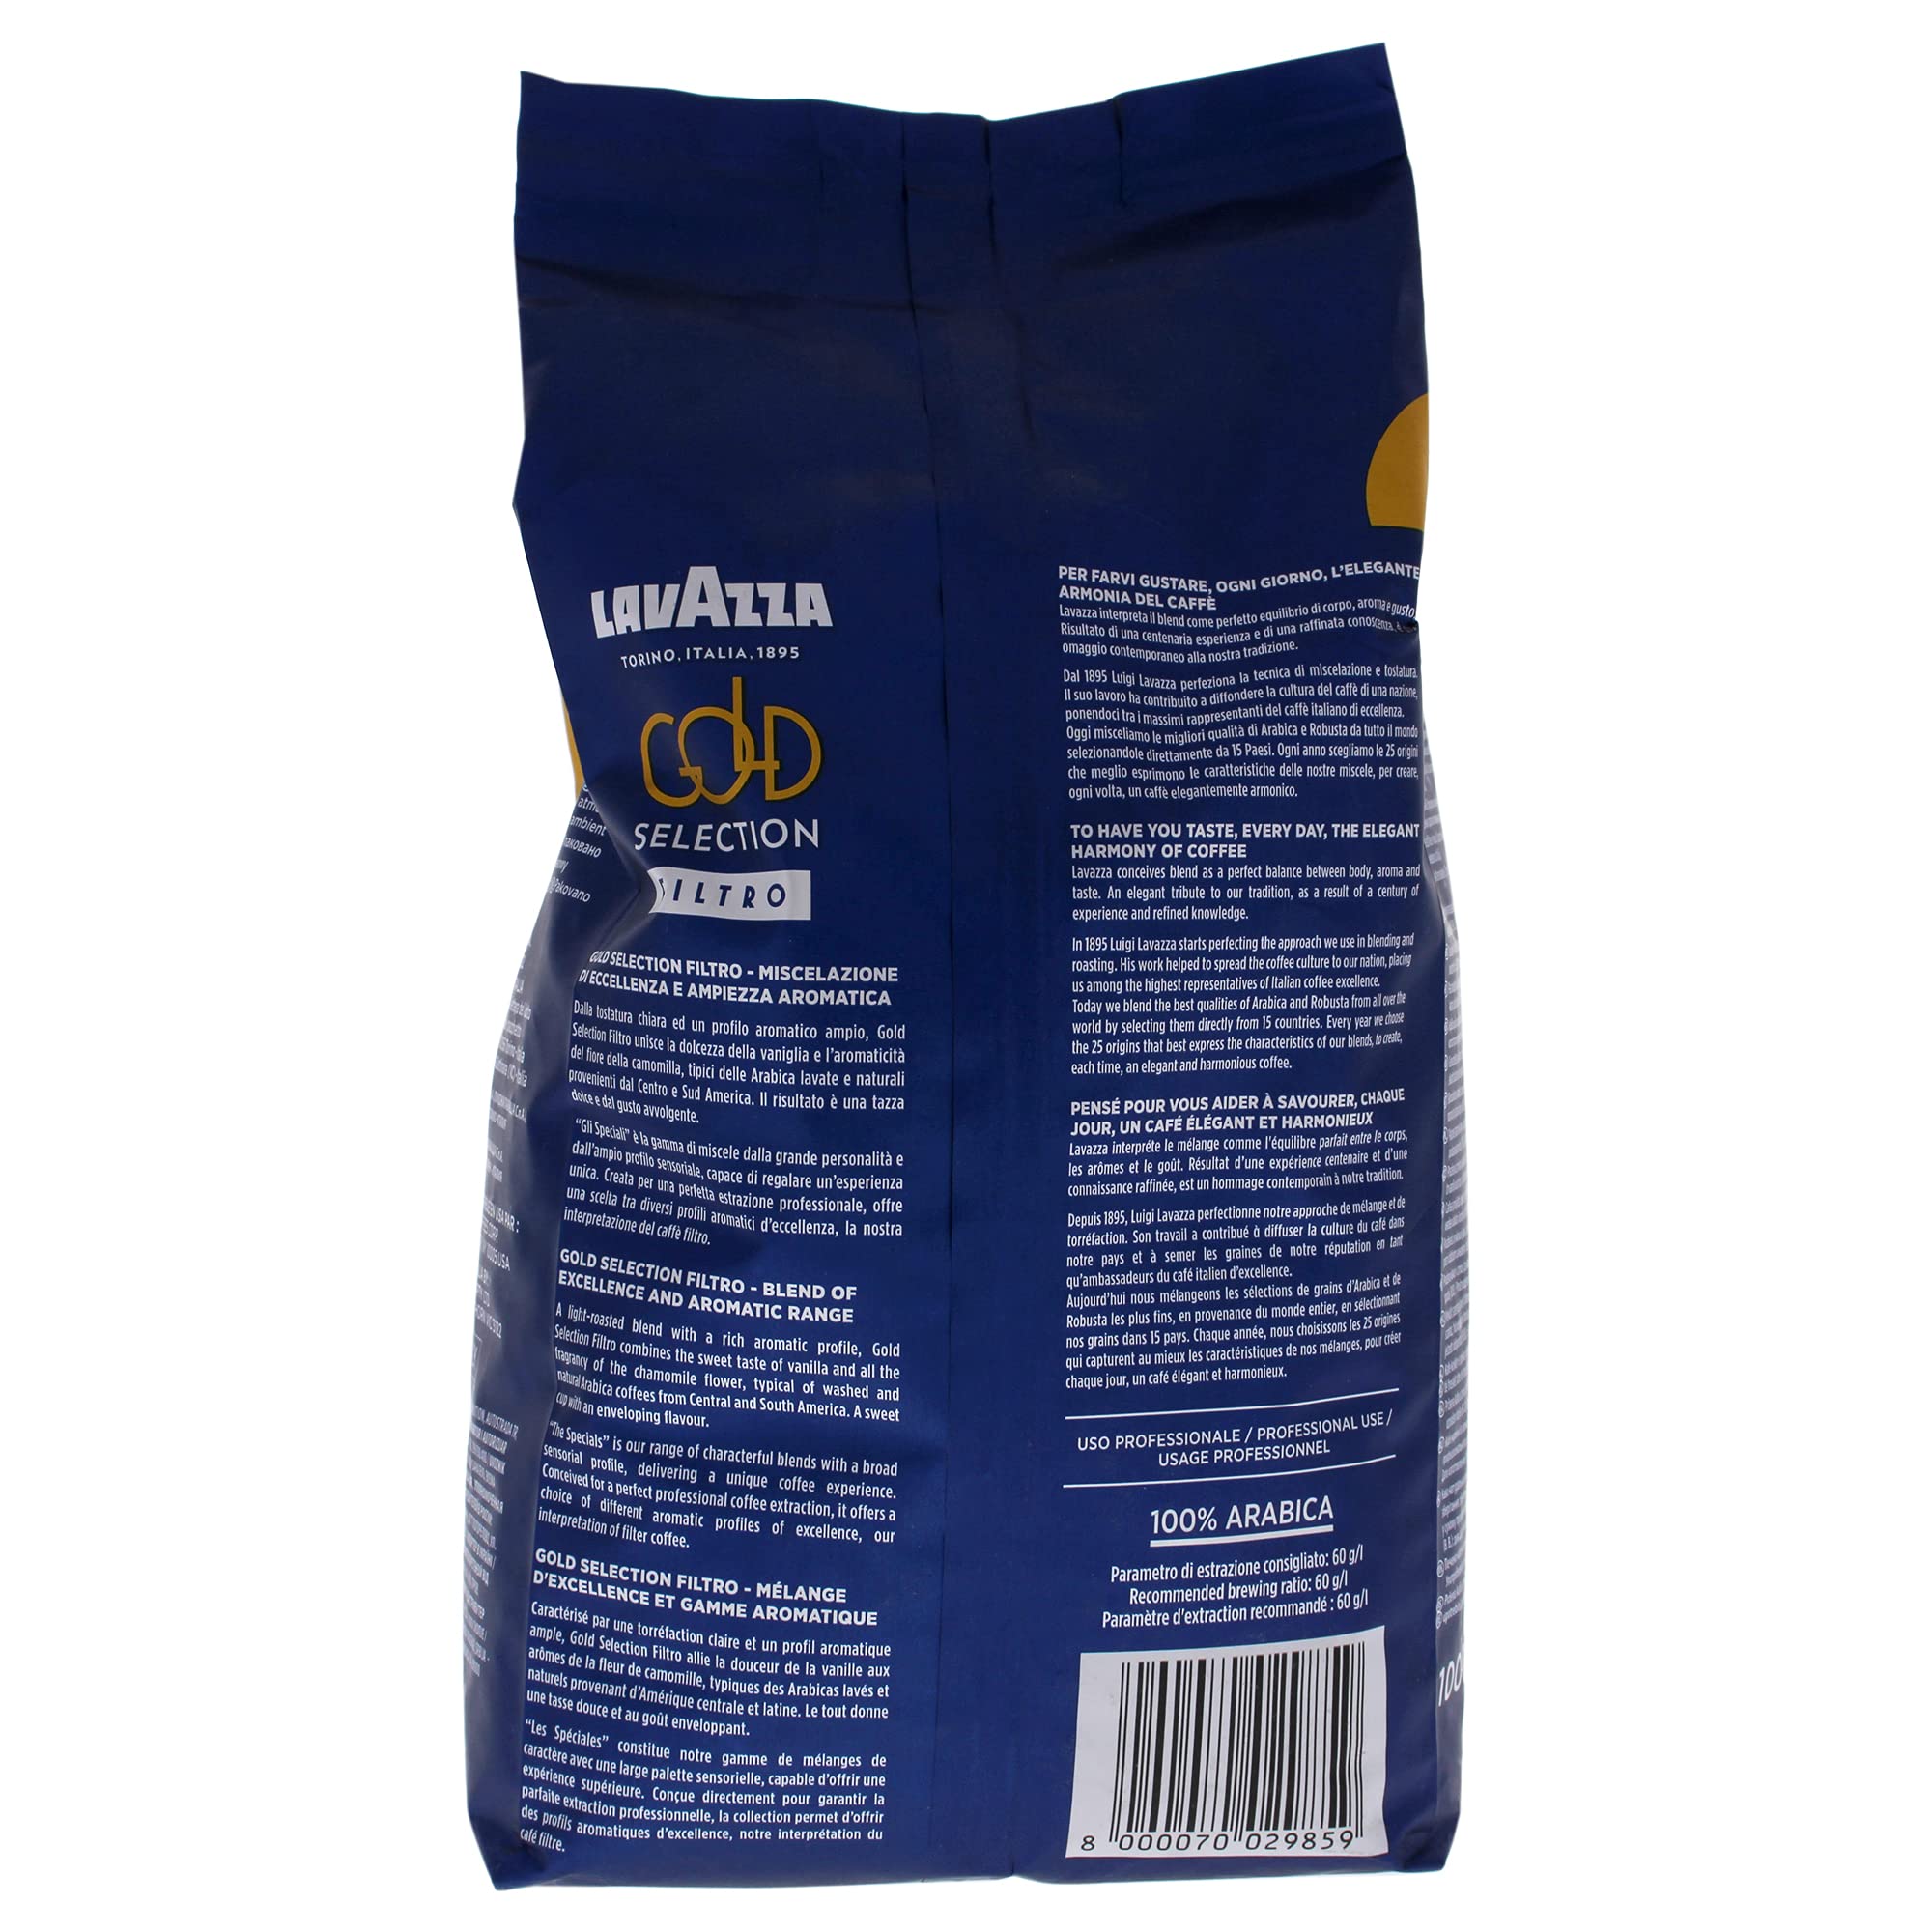 Lavazza Gold Selection Filtro Whole Bean Coffee Light Roast, Authentic Italian, Blended and roasted in Italy,Vanille and Chamomille flower aromatic notes, 2.2 LB (Pack of 1)